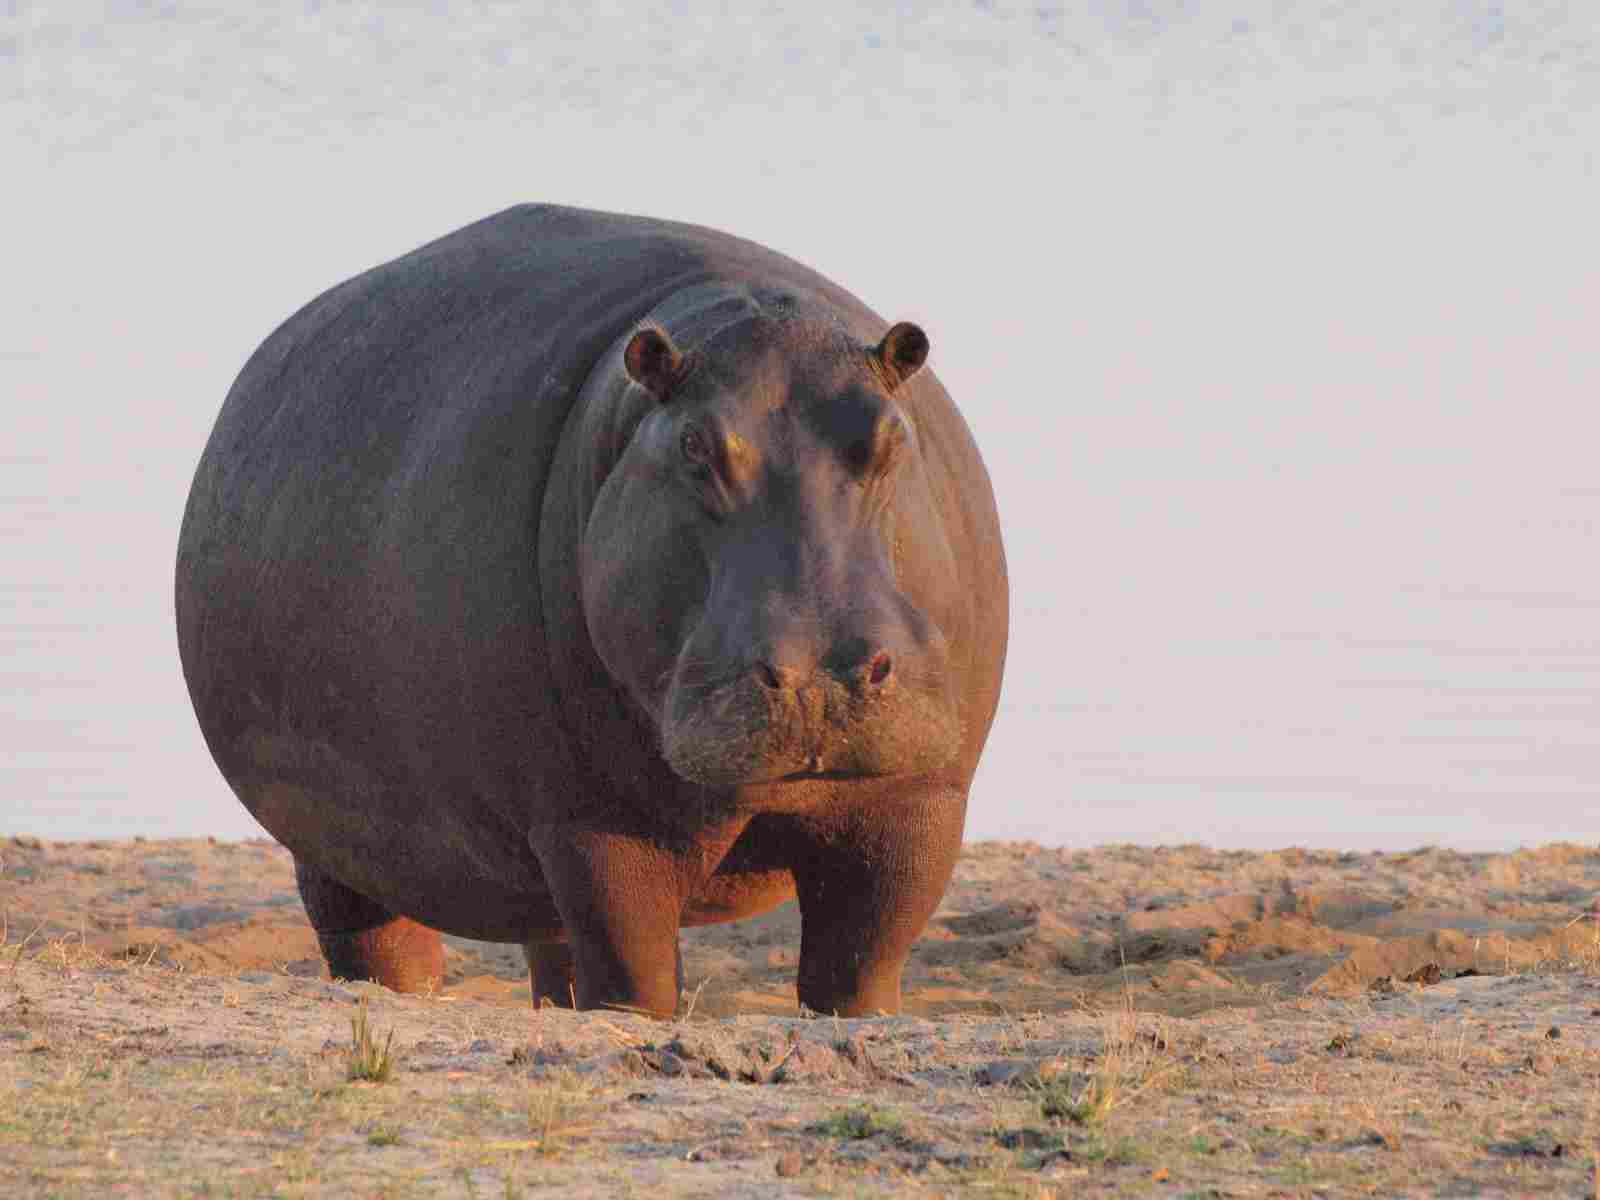 Hippo Vs Grizzly Bear: Hippos are More Dangerous Toward Humans Than Grizzly Bears (Credit: Gusjer 2009 .CC BY 2.0.)